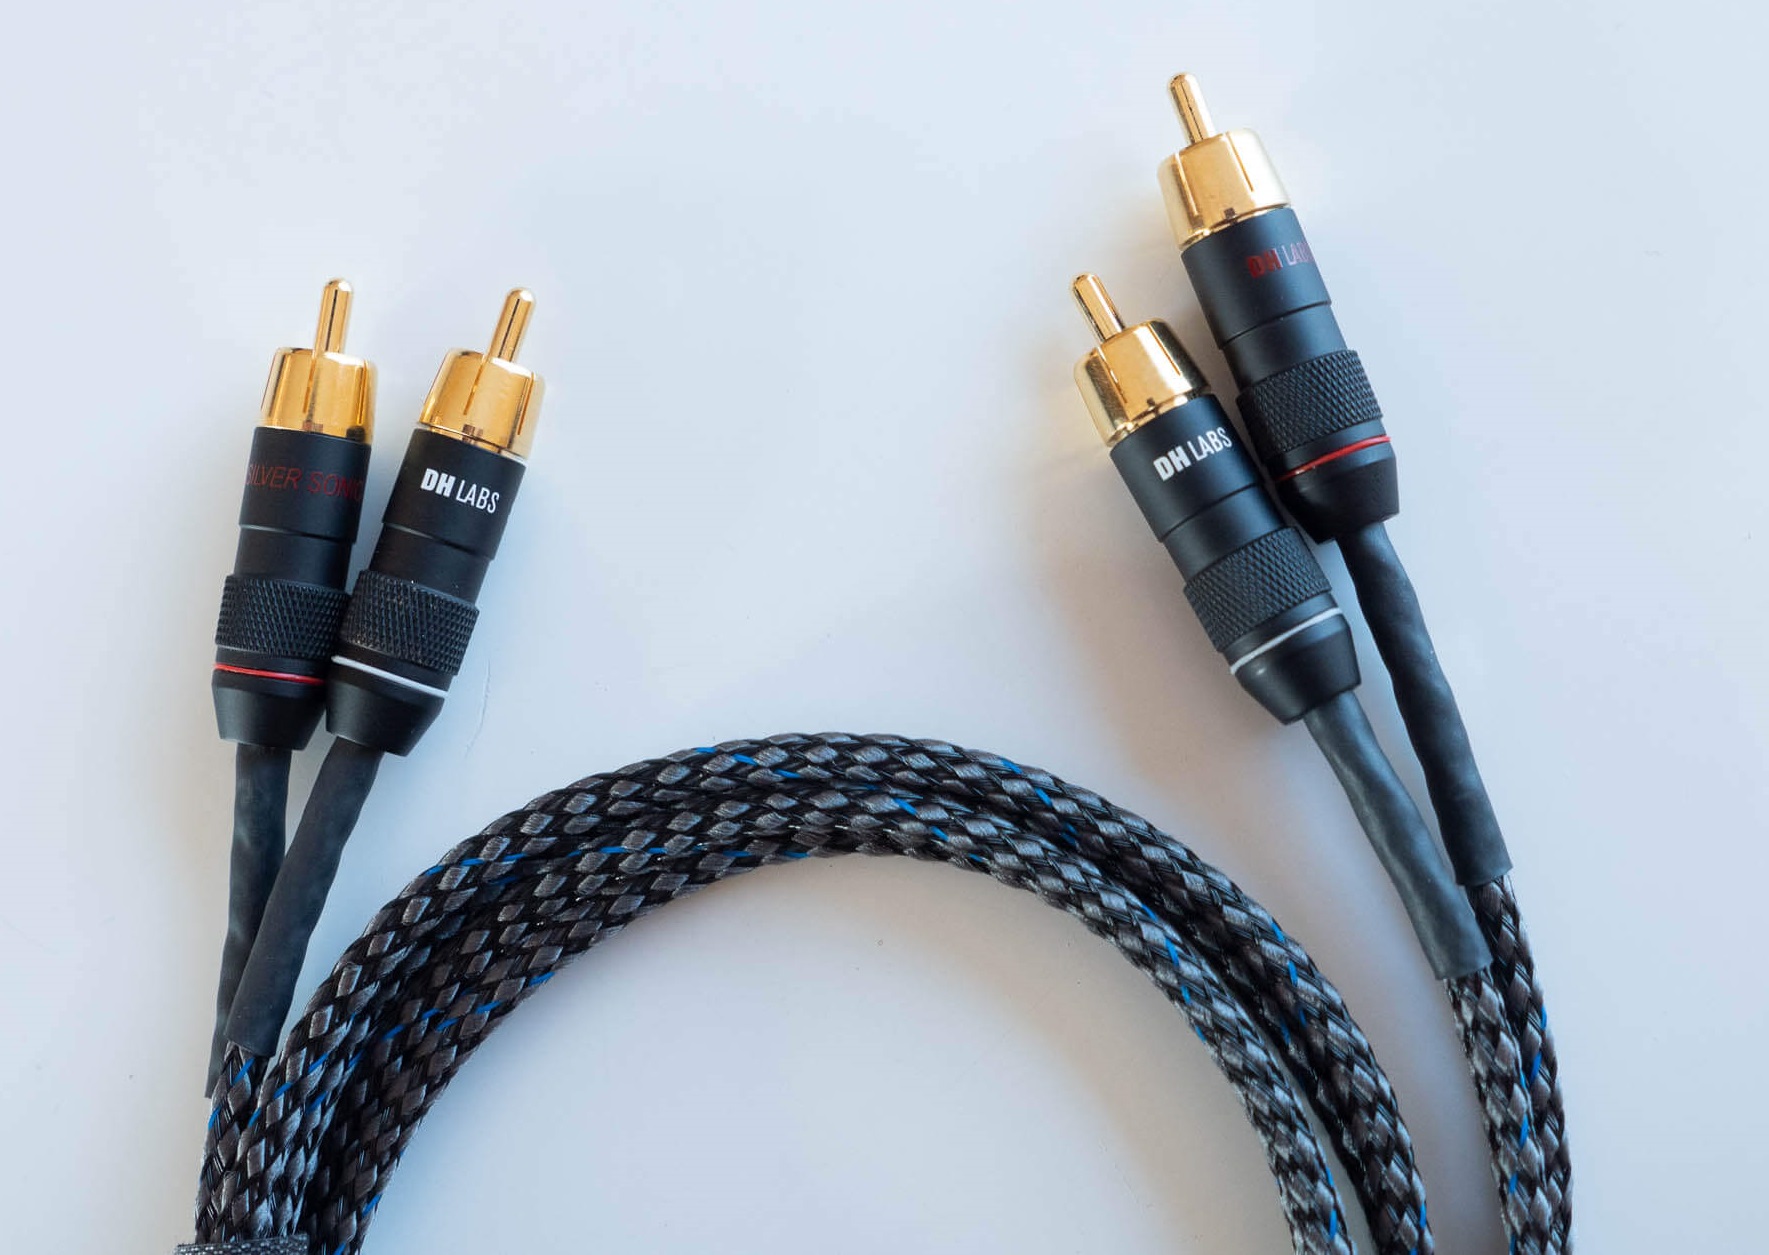 Кабели межблочные аудио DH Labs Silver Pulse interconnect RCA 0,5m кабели межблочные аудио dh labs bl 1 interconnect rca 0 5m